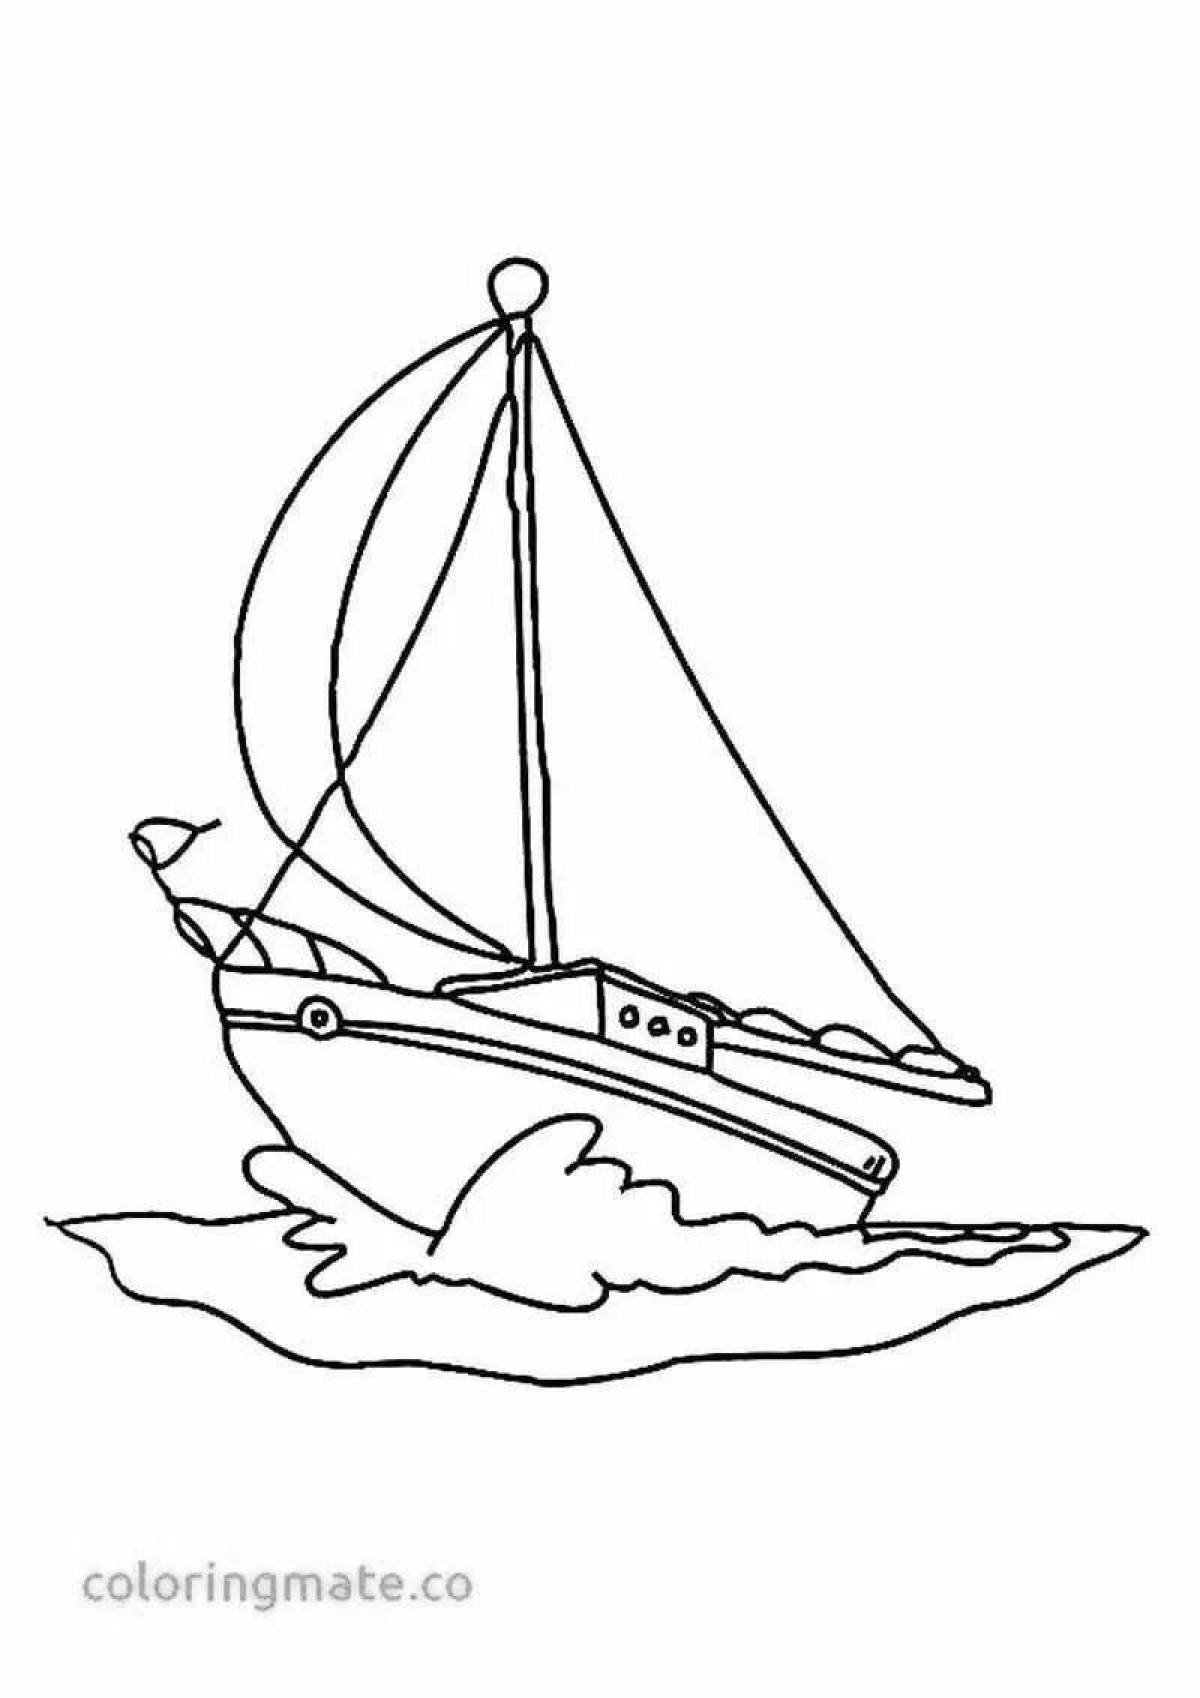 Bright boat coloring page